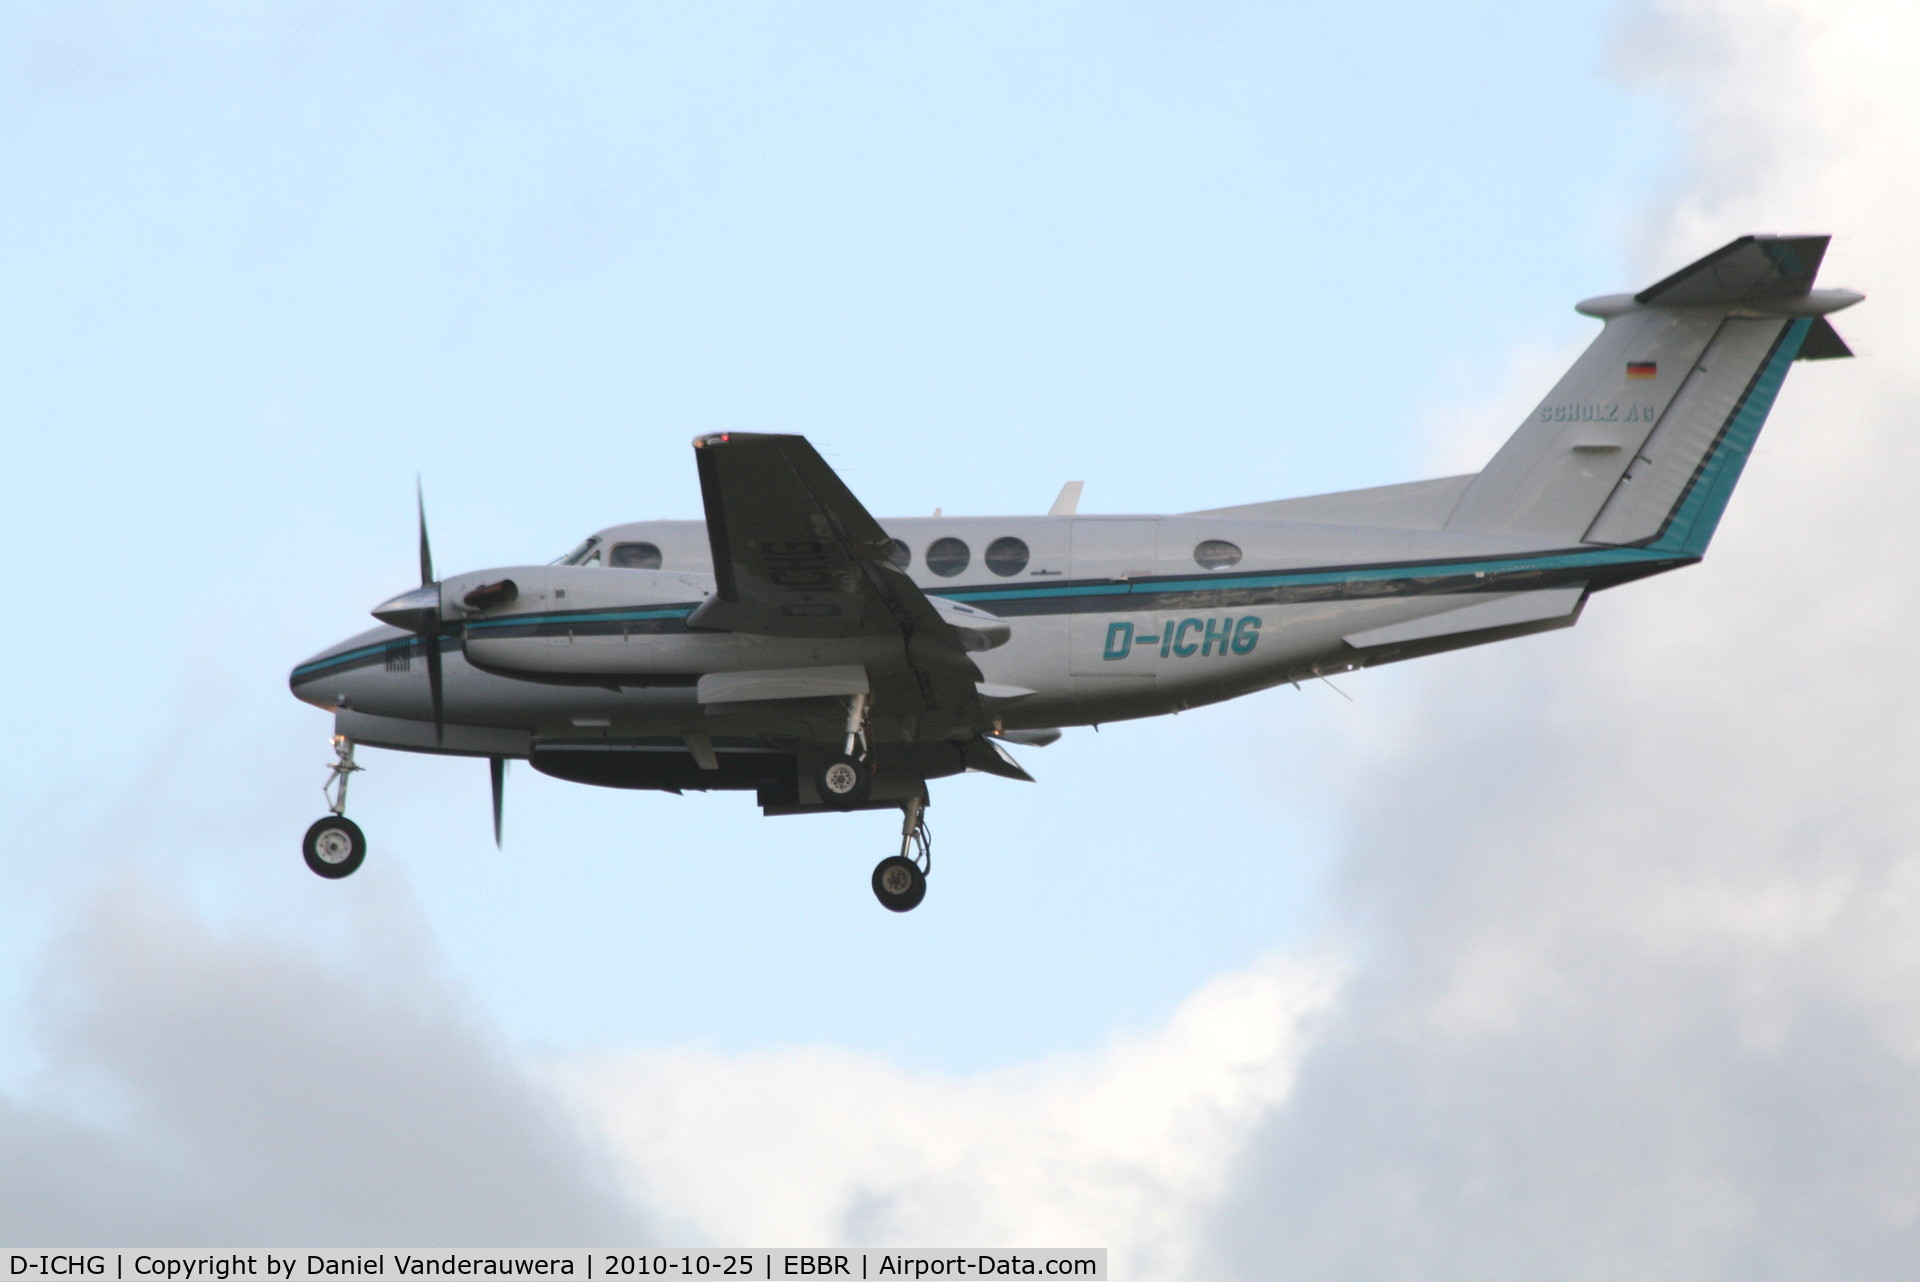 D-ICHG, 1991 Beech B200 King Air C/N BB-1400, Arriving to RWY 25L while thick clouds cover the sun